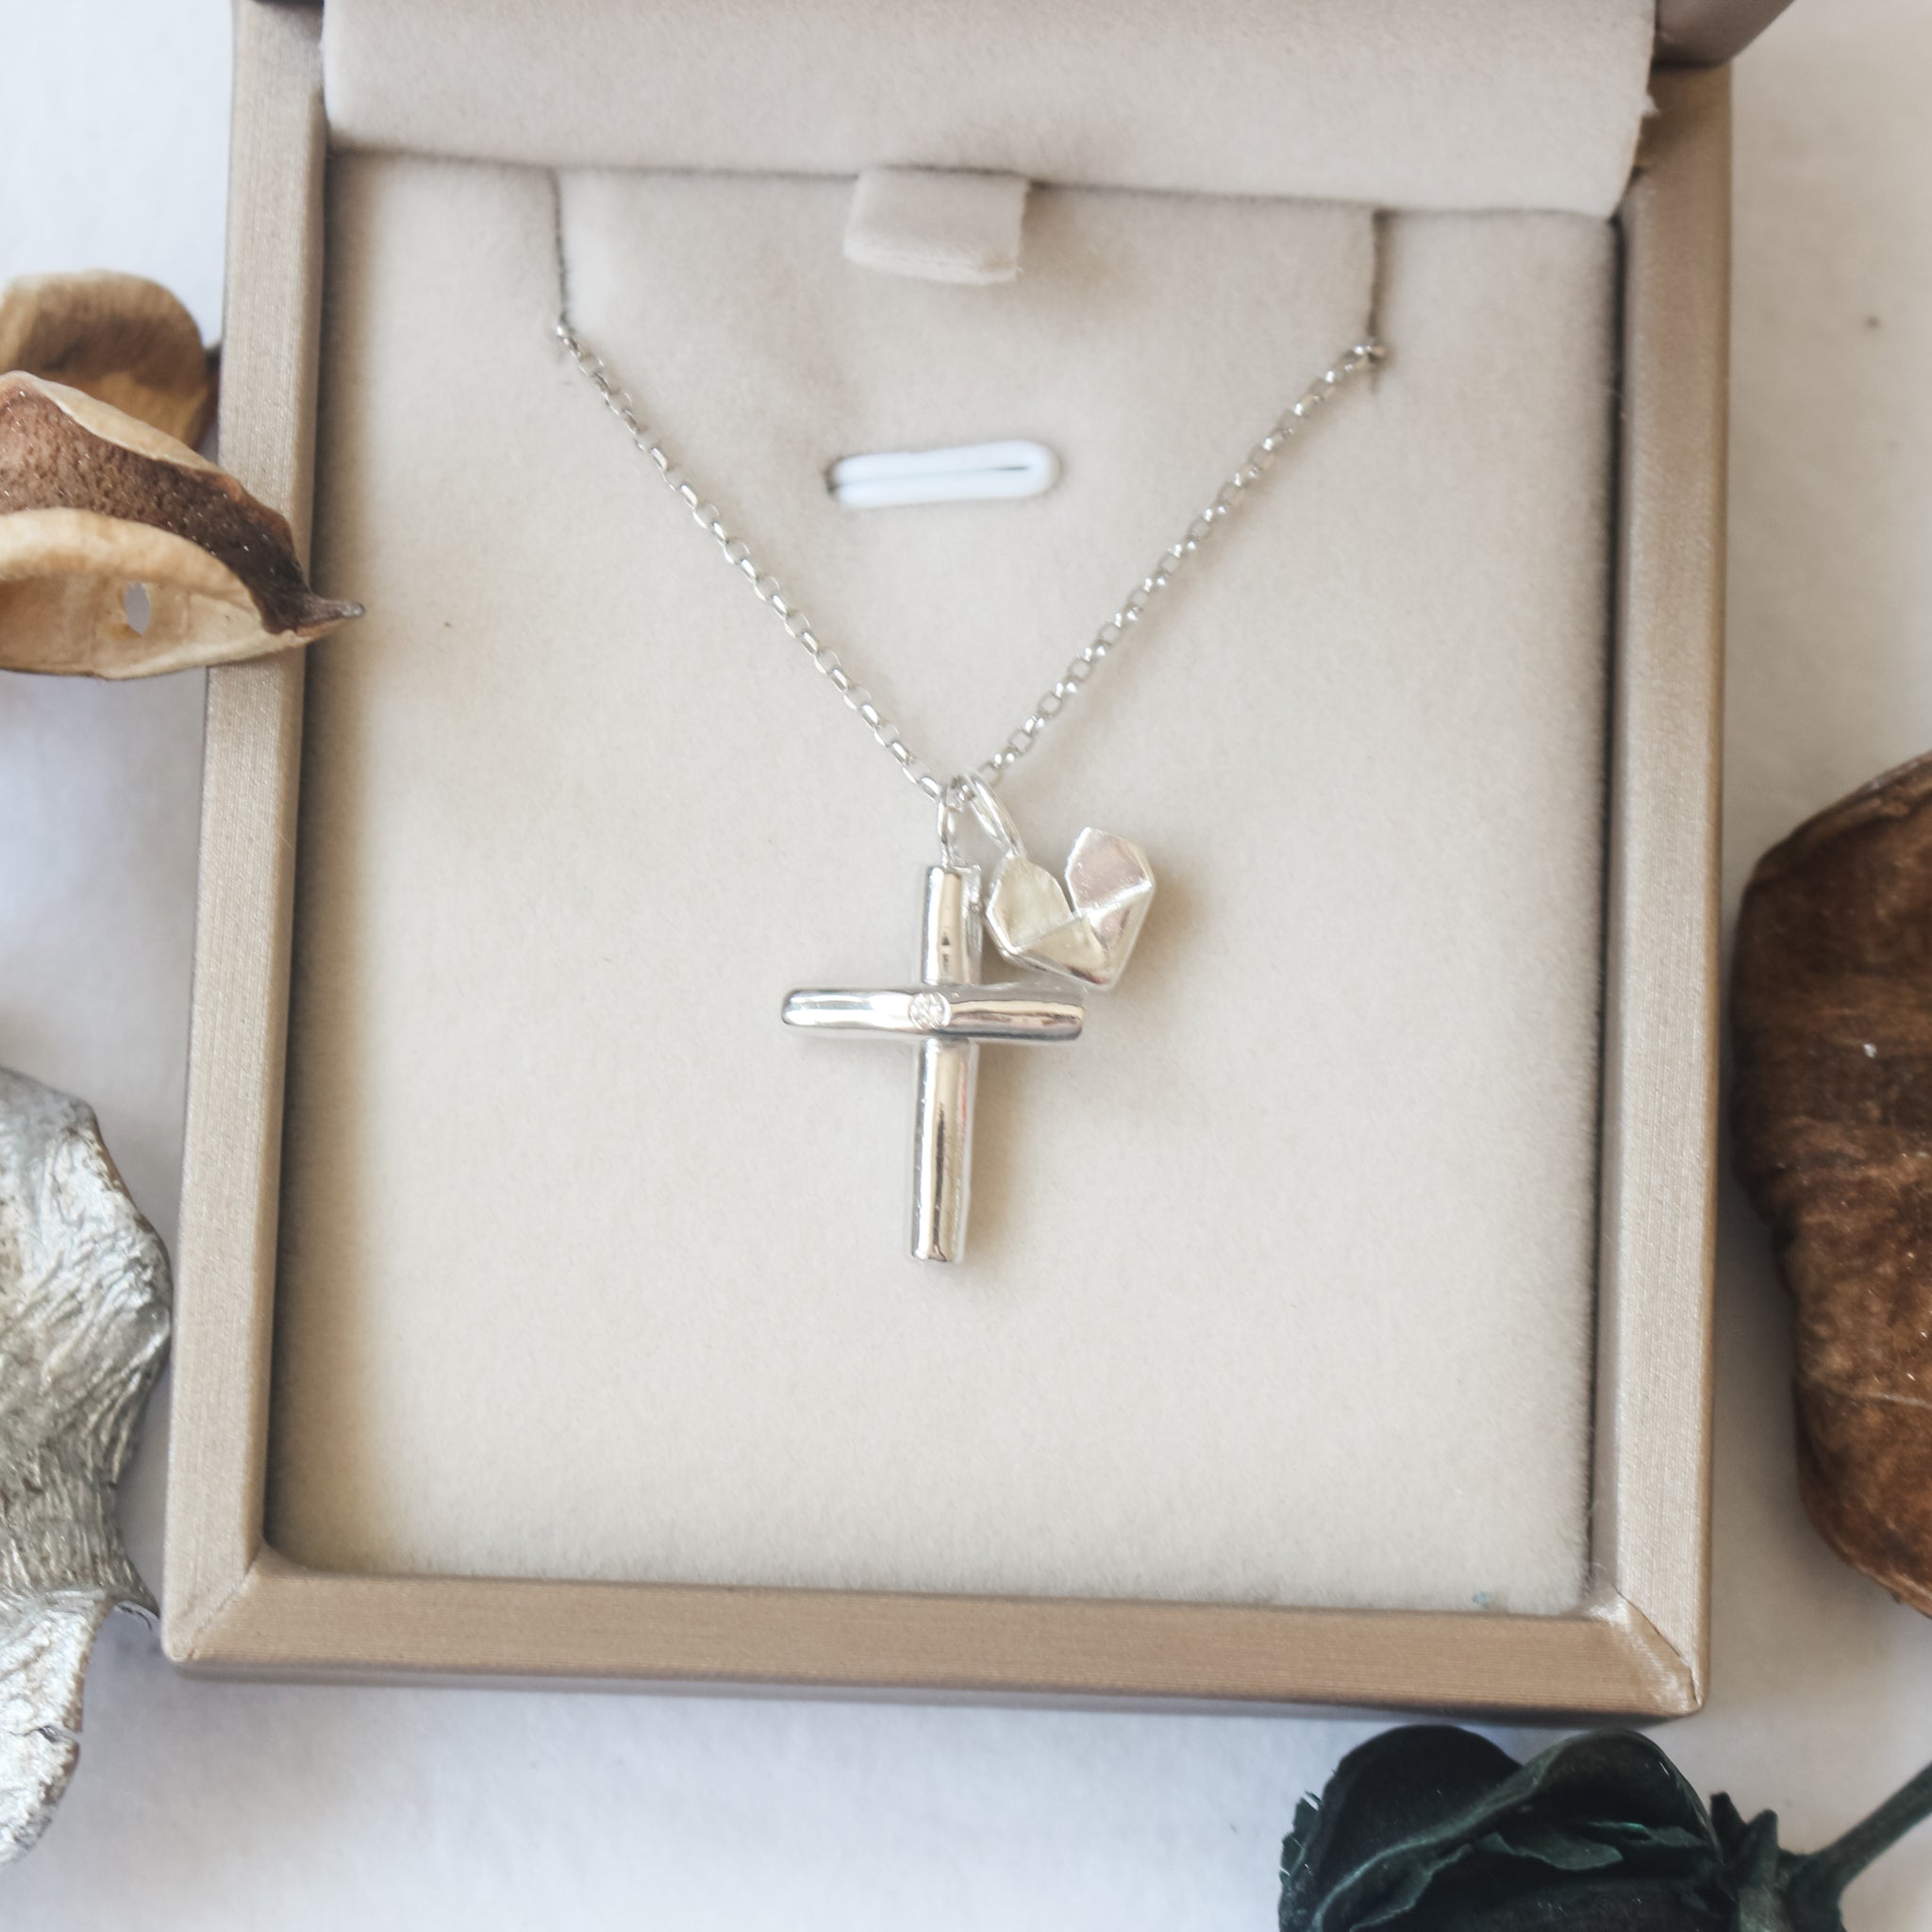 Cross with Heart - Sterling Silver Diamond Cross Necklace (Small) Plain or Engraved with Silver Origami Heart